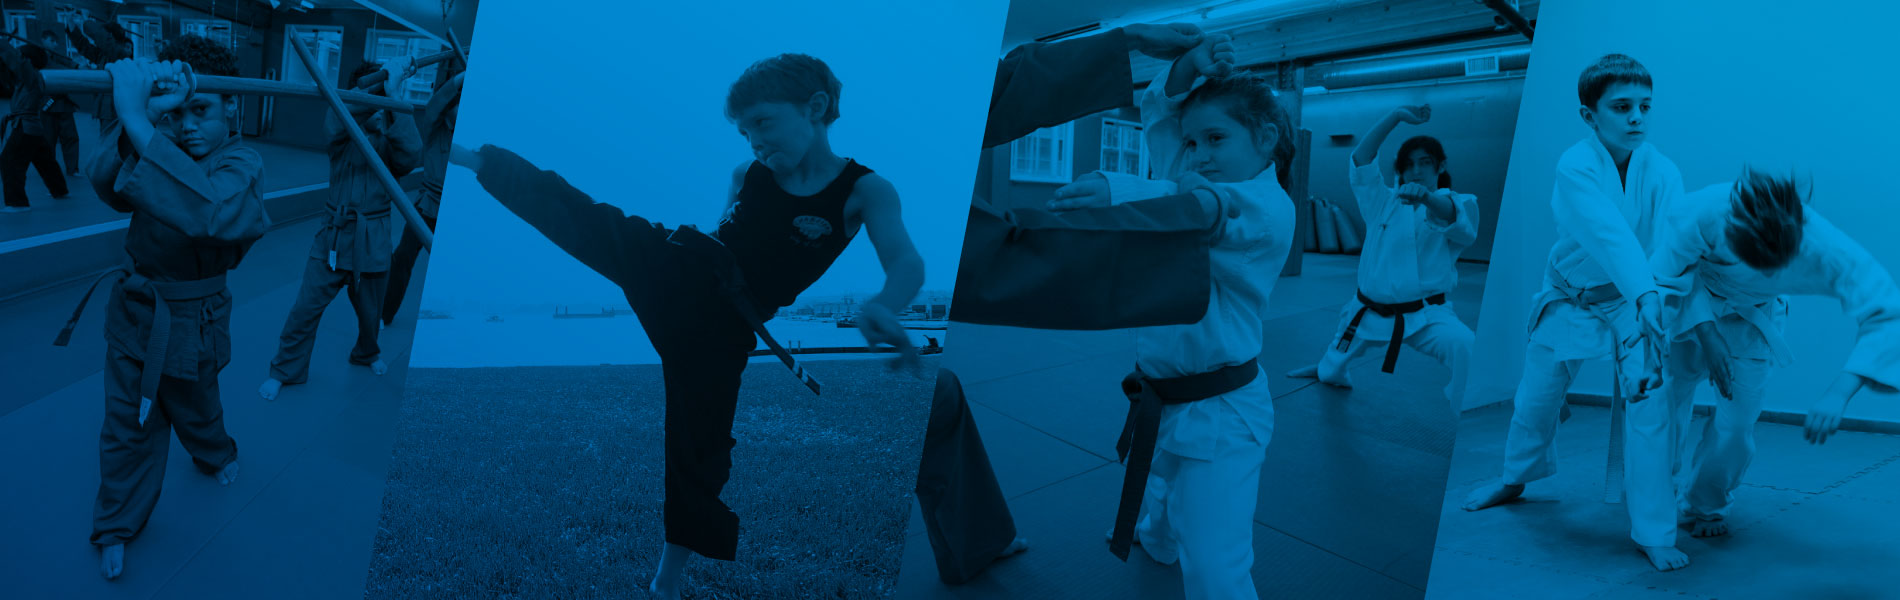 Here's how to choose family martial arts you and your child can benefit from.